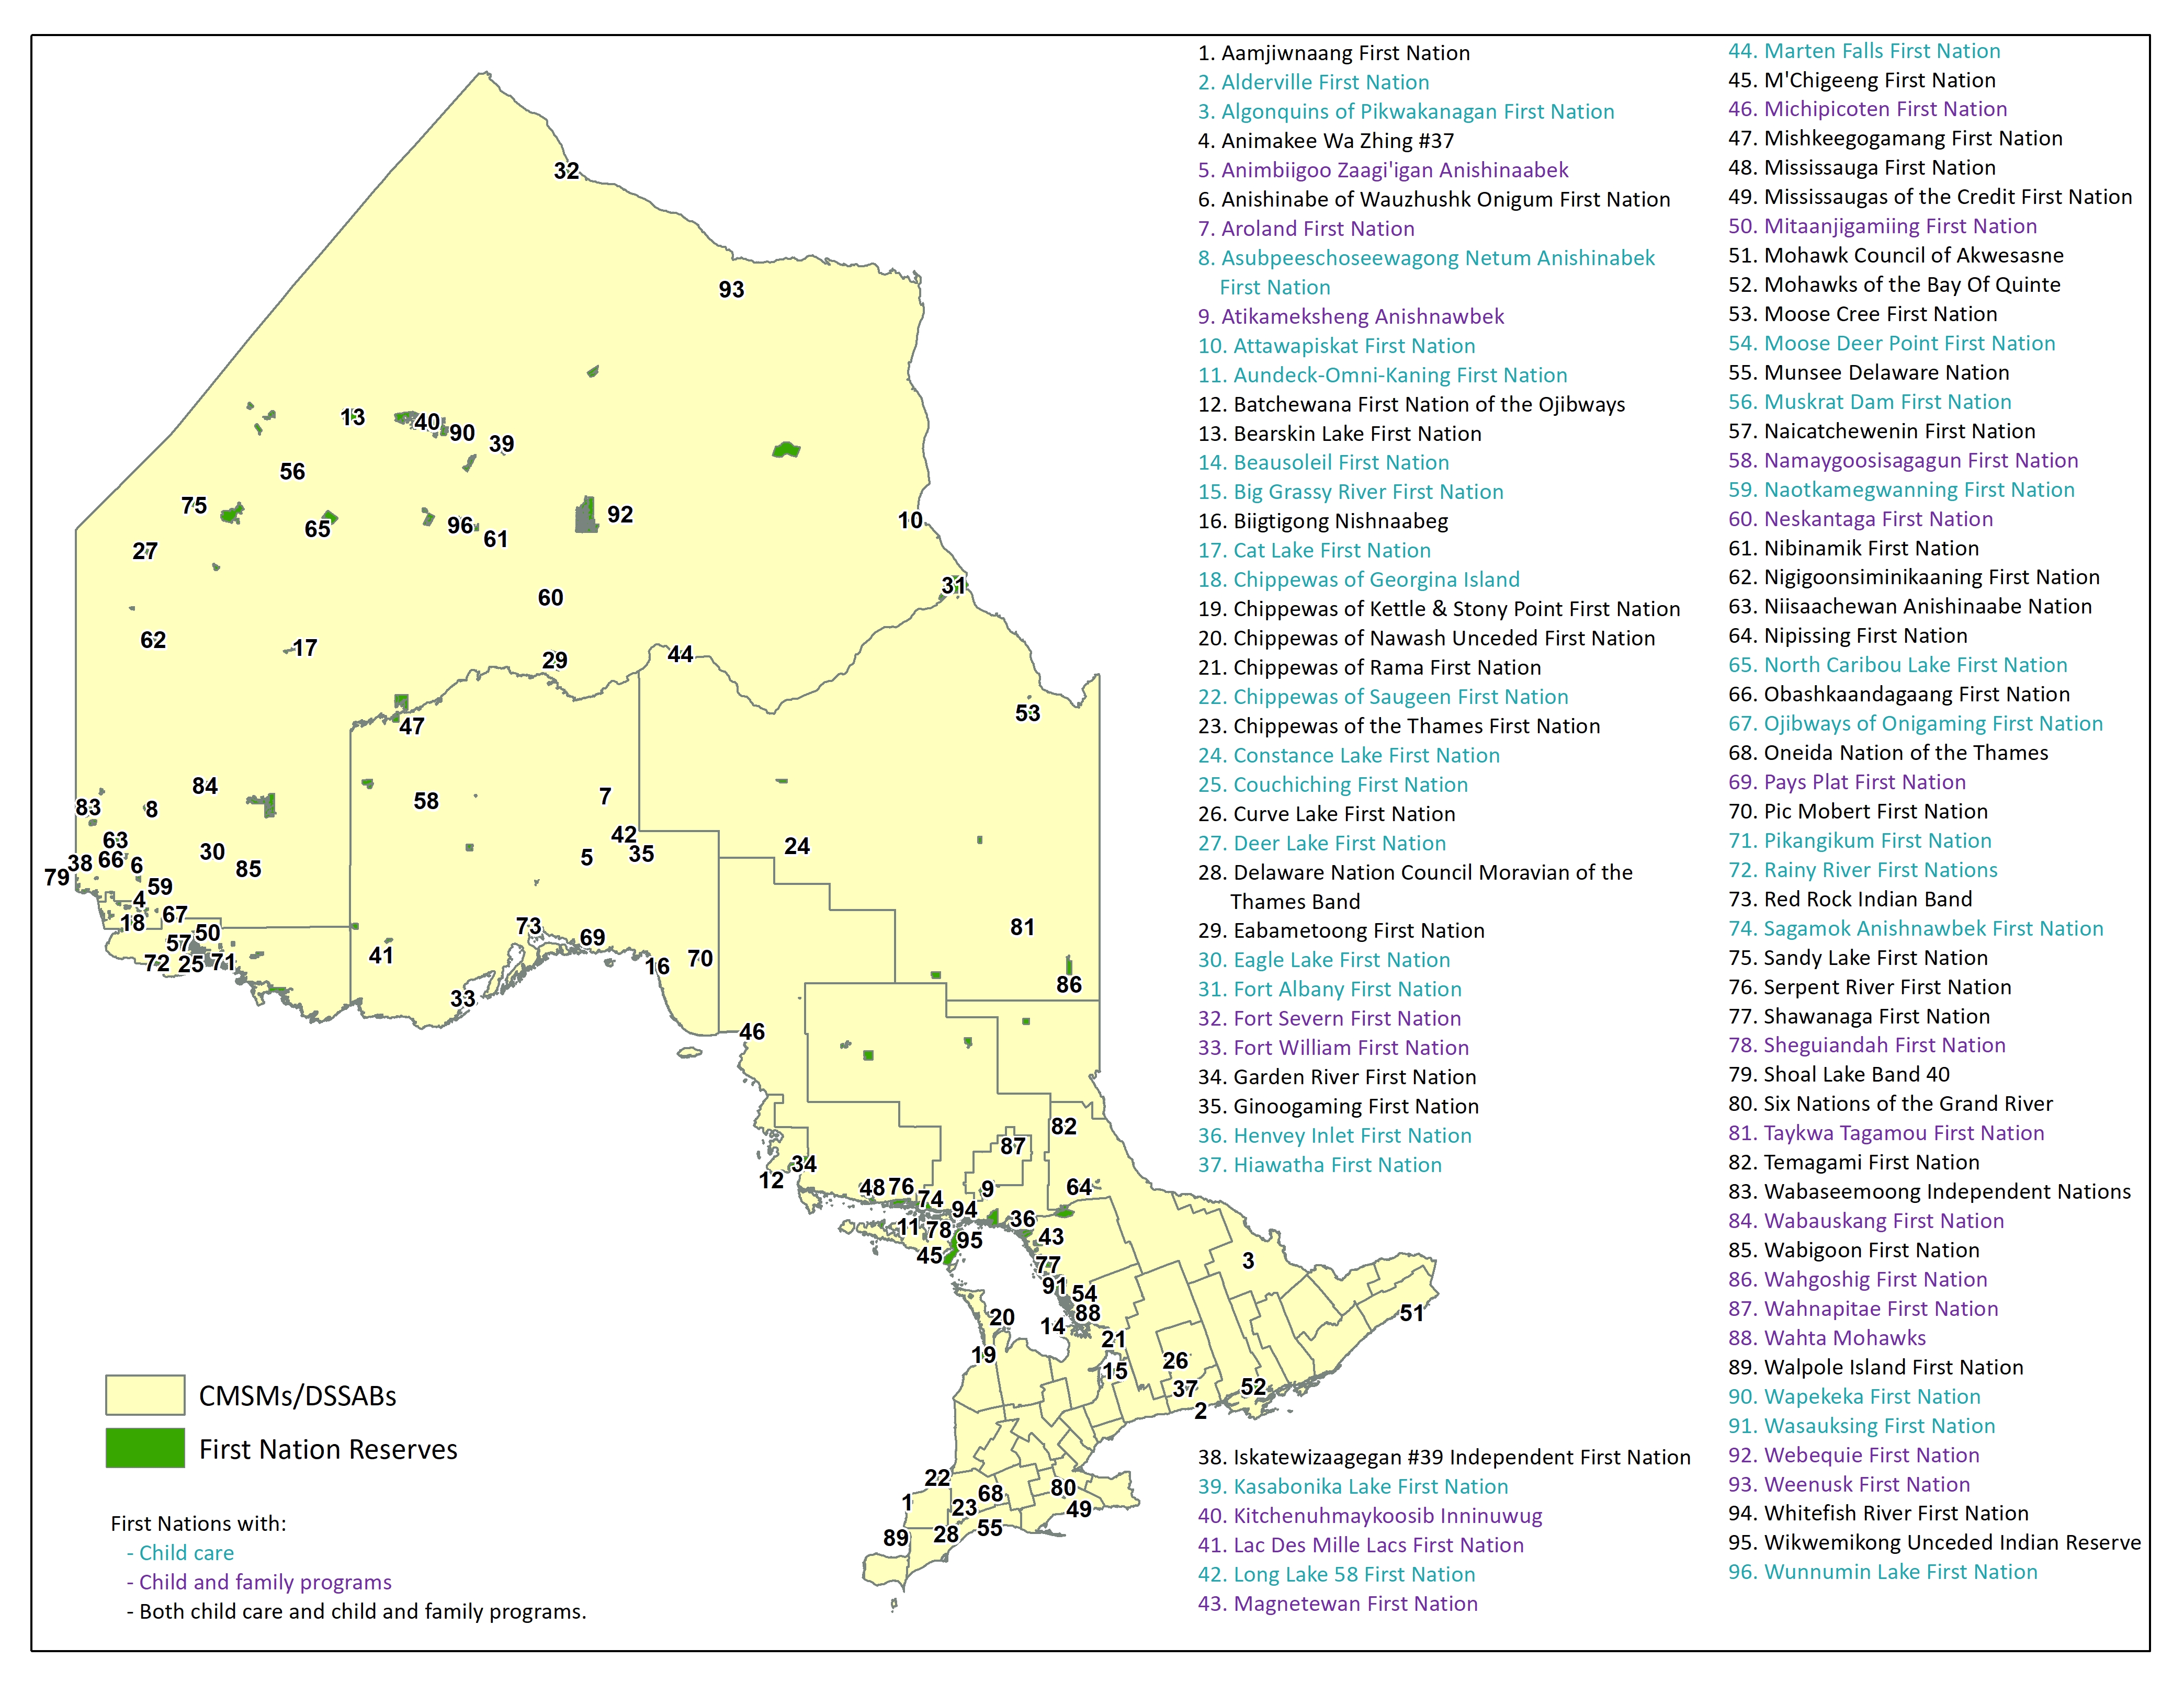 Map of Ontario showing the locations of First Nations that received provincial funding for child care and/or child and family programs as of March 31, 2020.